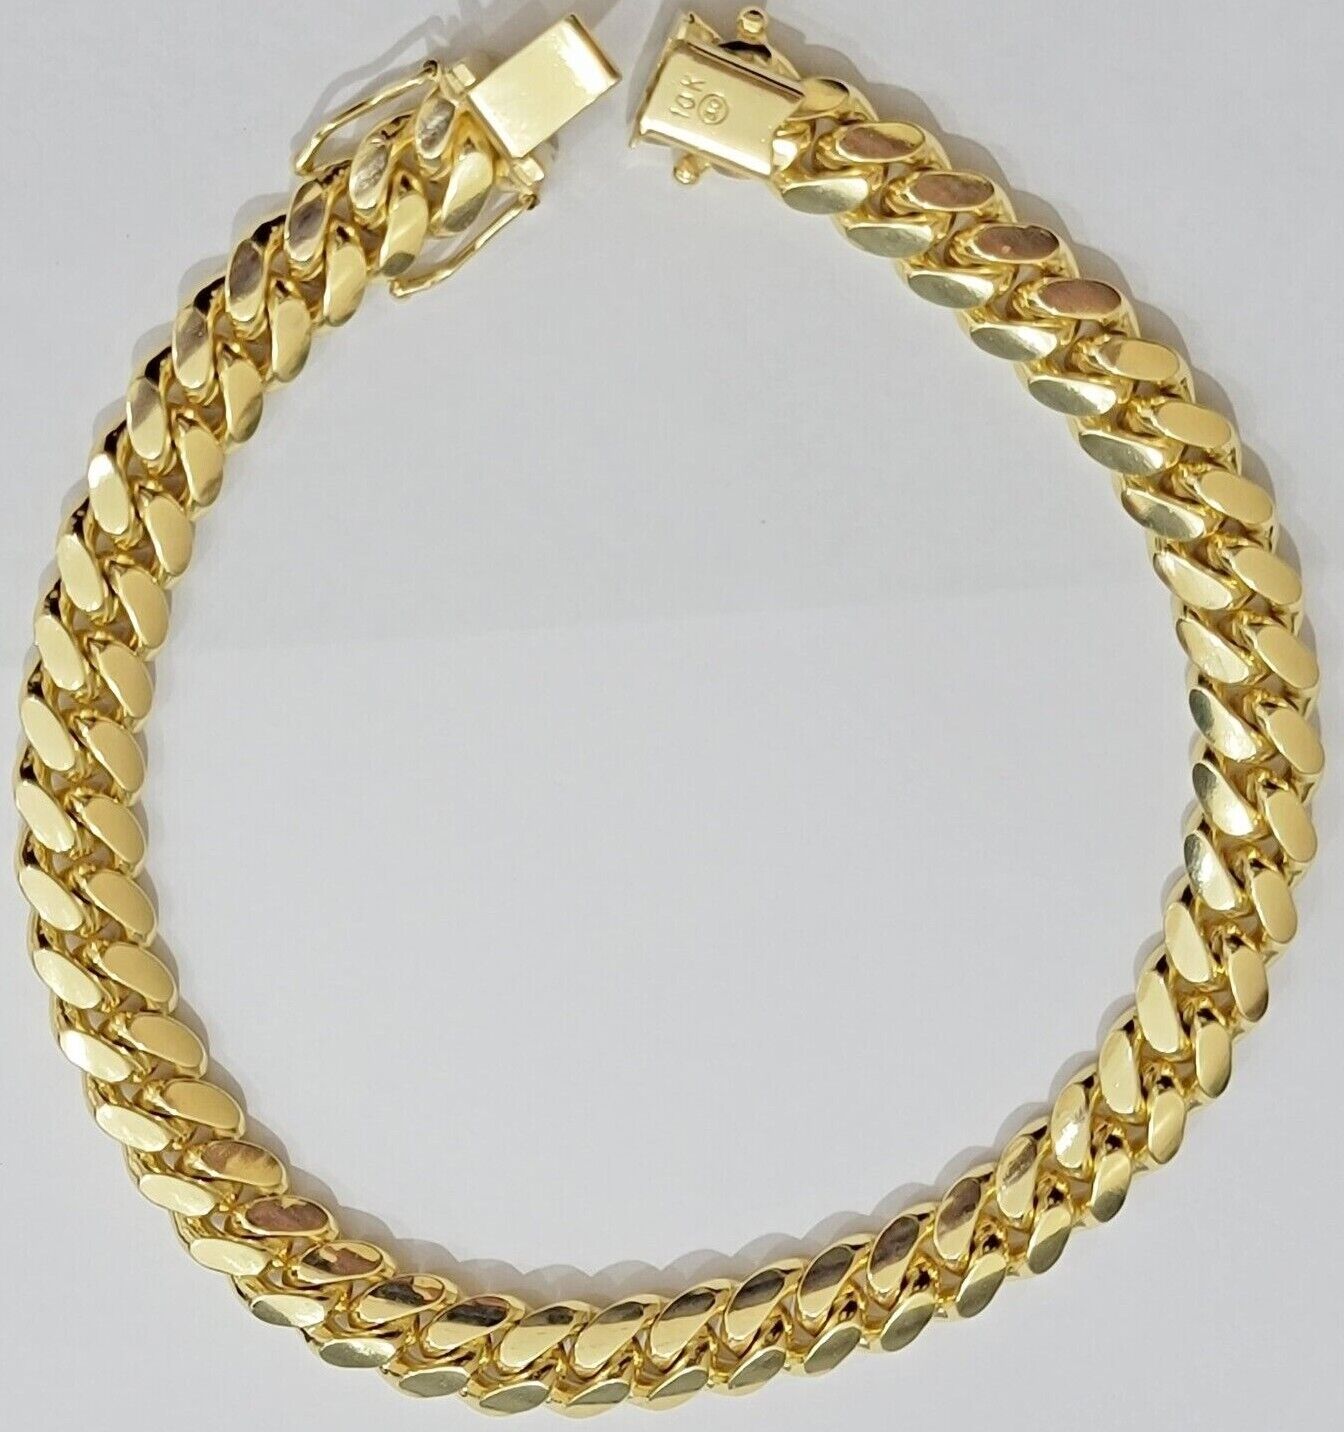 Solid 10k Gold Bracelet 8mm Miami Cuban Link 8" long Box Clasp 10kt Yellow, REAL